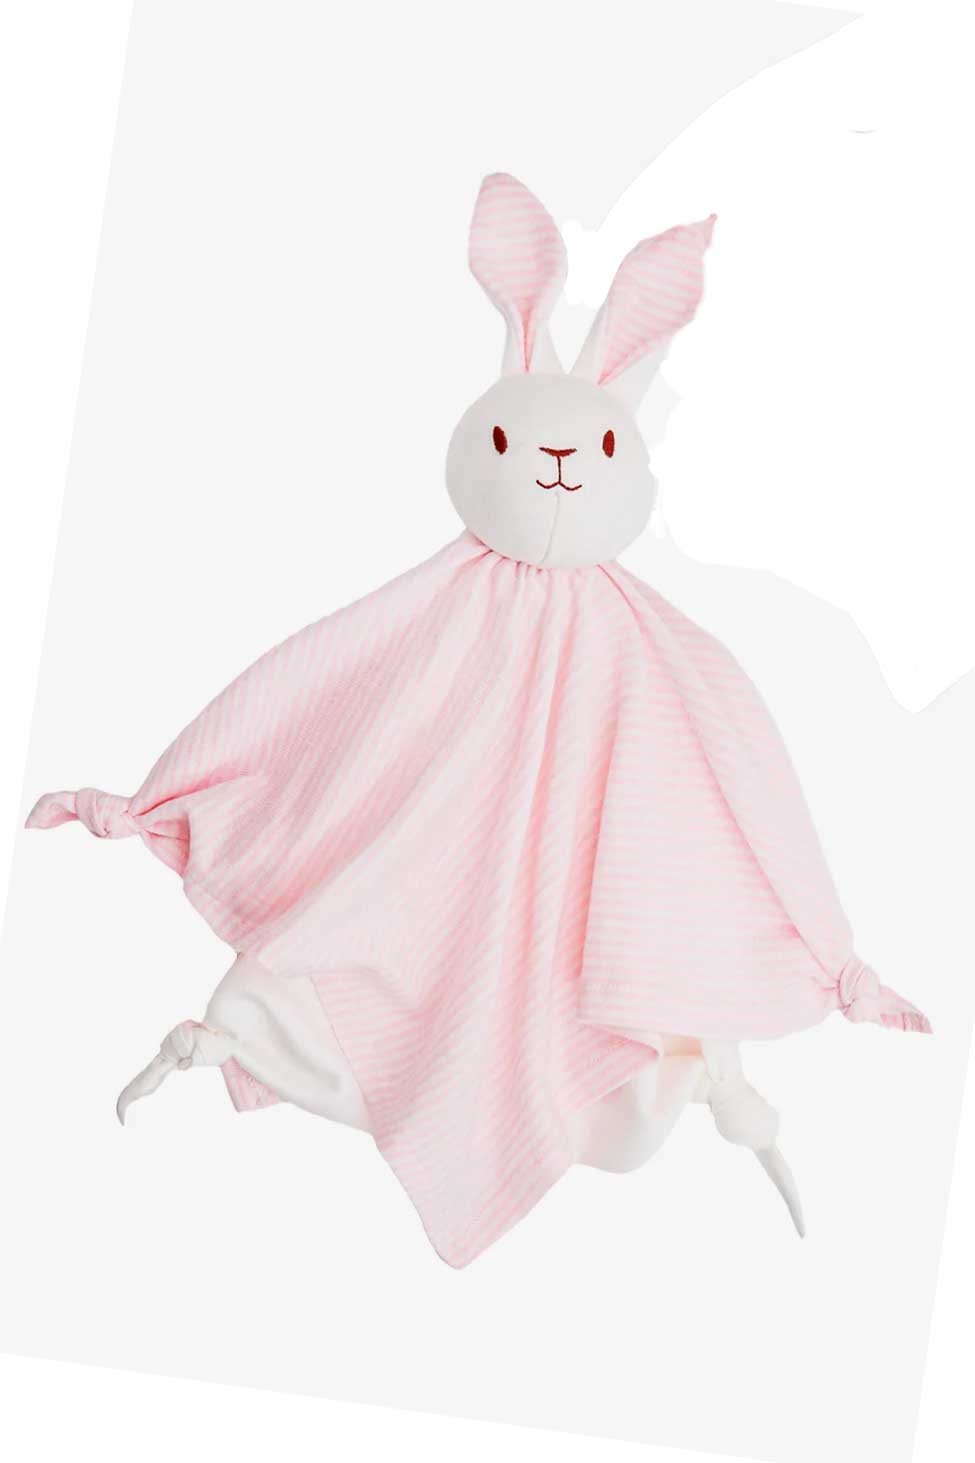 Under The Nile Toy Pink Bunny / any age Organic Cotton Sleeping Friend for Baby - Pink Bunny